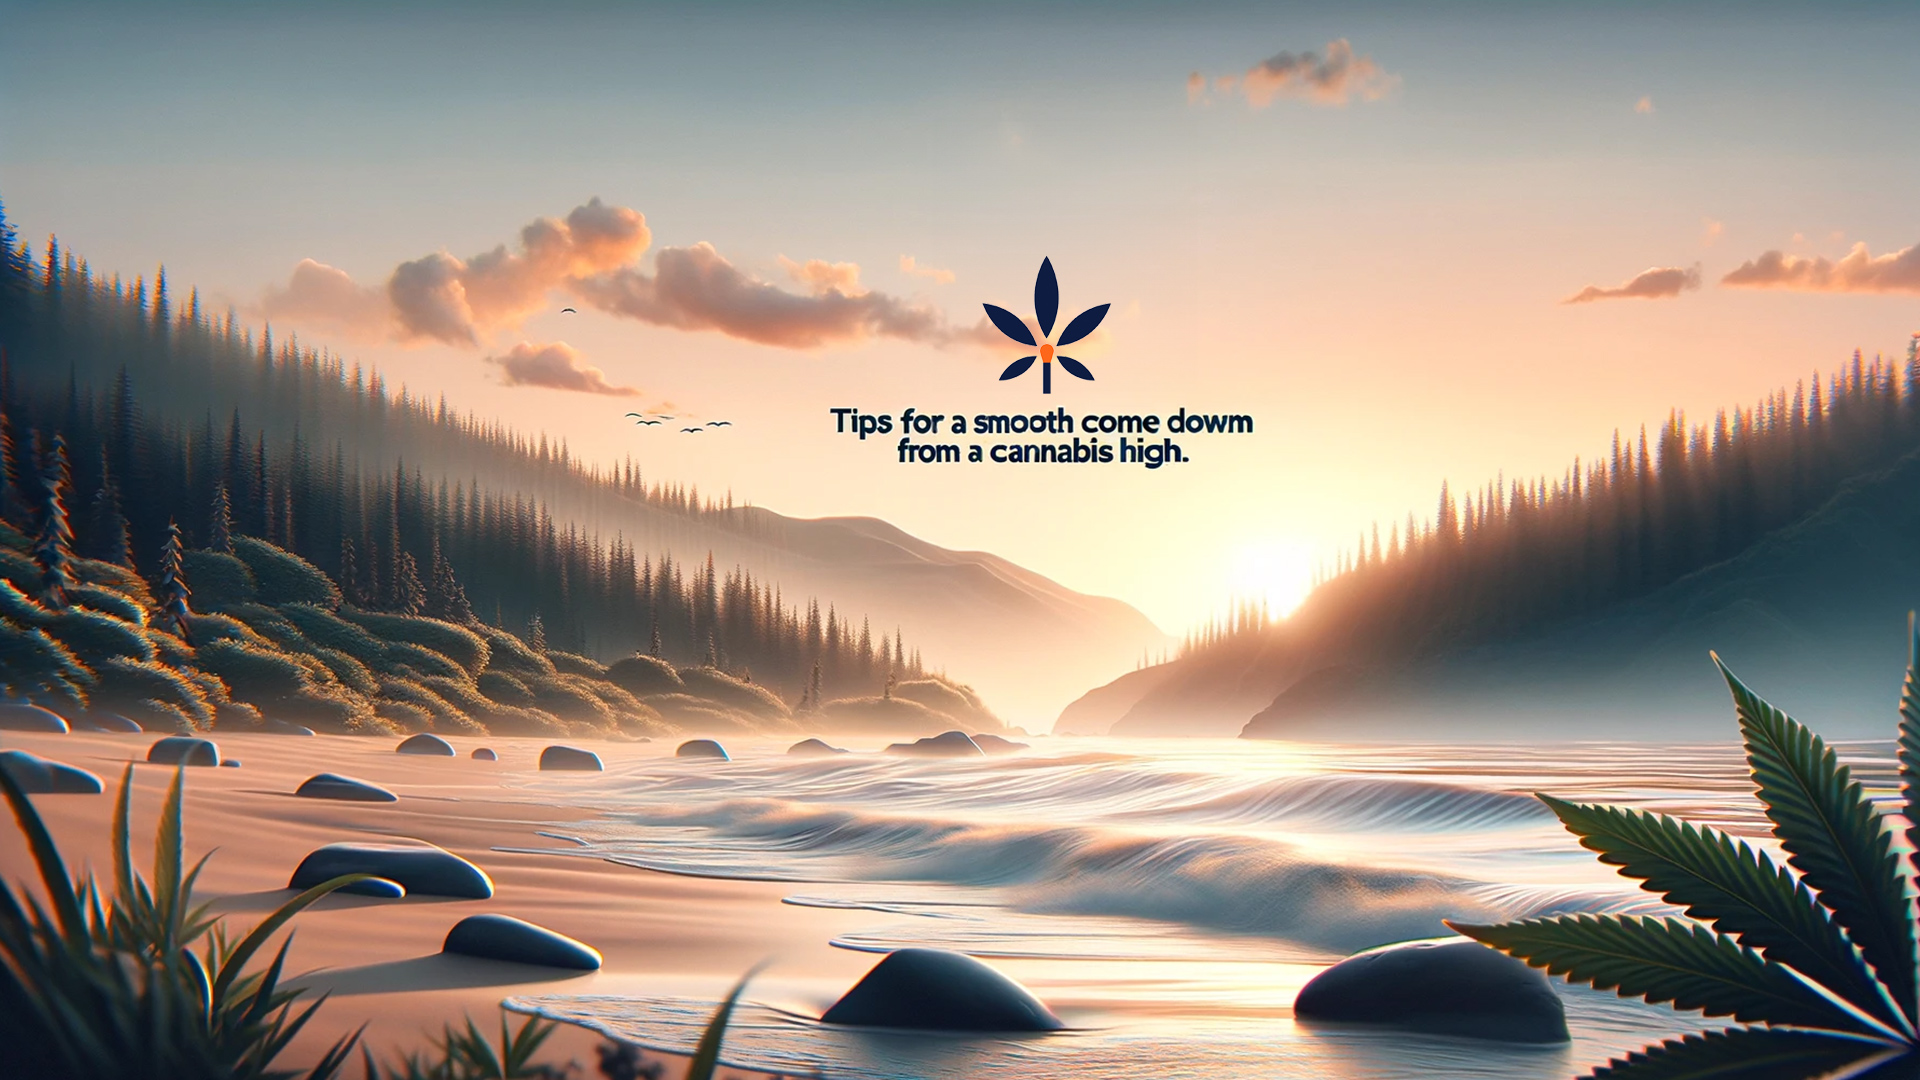 Serene scene for smooth cannabis high descent - tips highlighted.